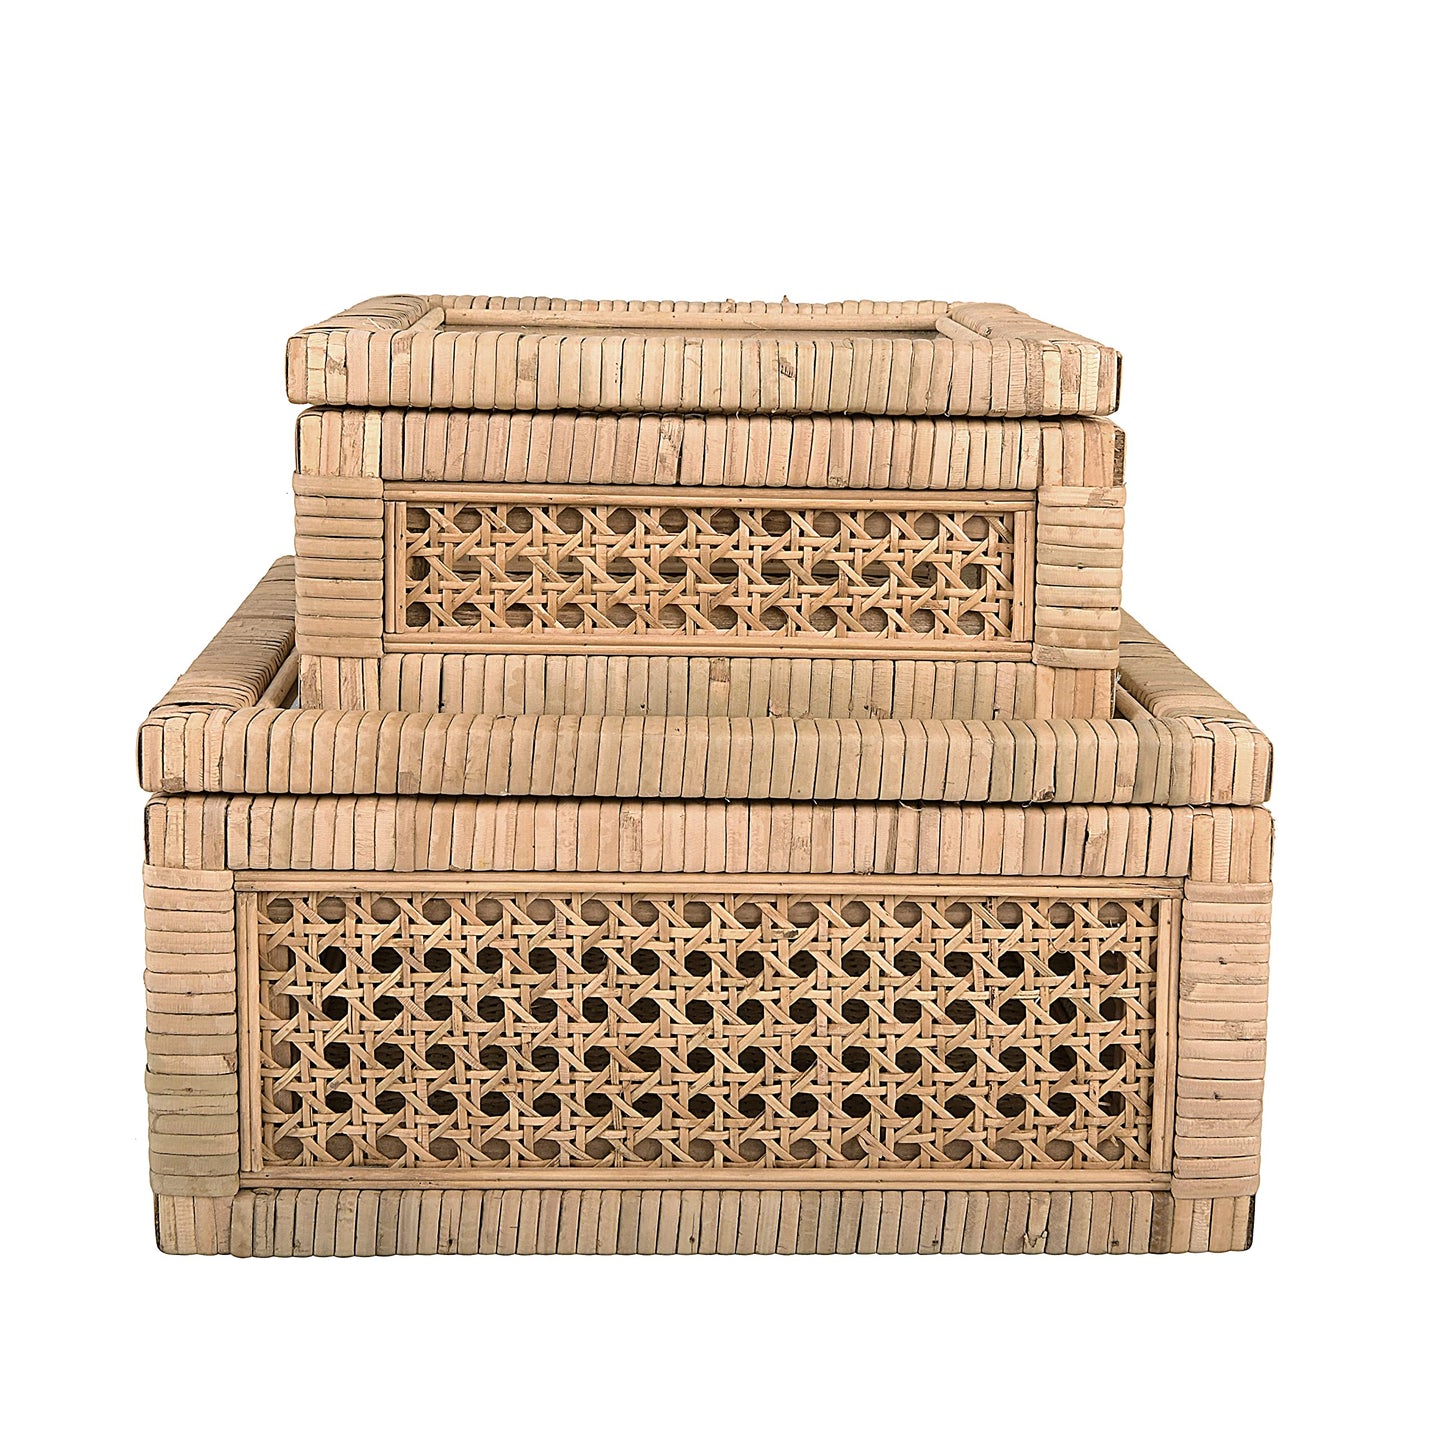 Creative Co-Op Modern Decorative Square Woven Rattan and Wood Display Boxes with Glass Top, Set of 2 Sizes, Natural Finish